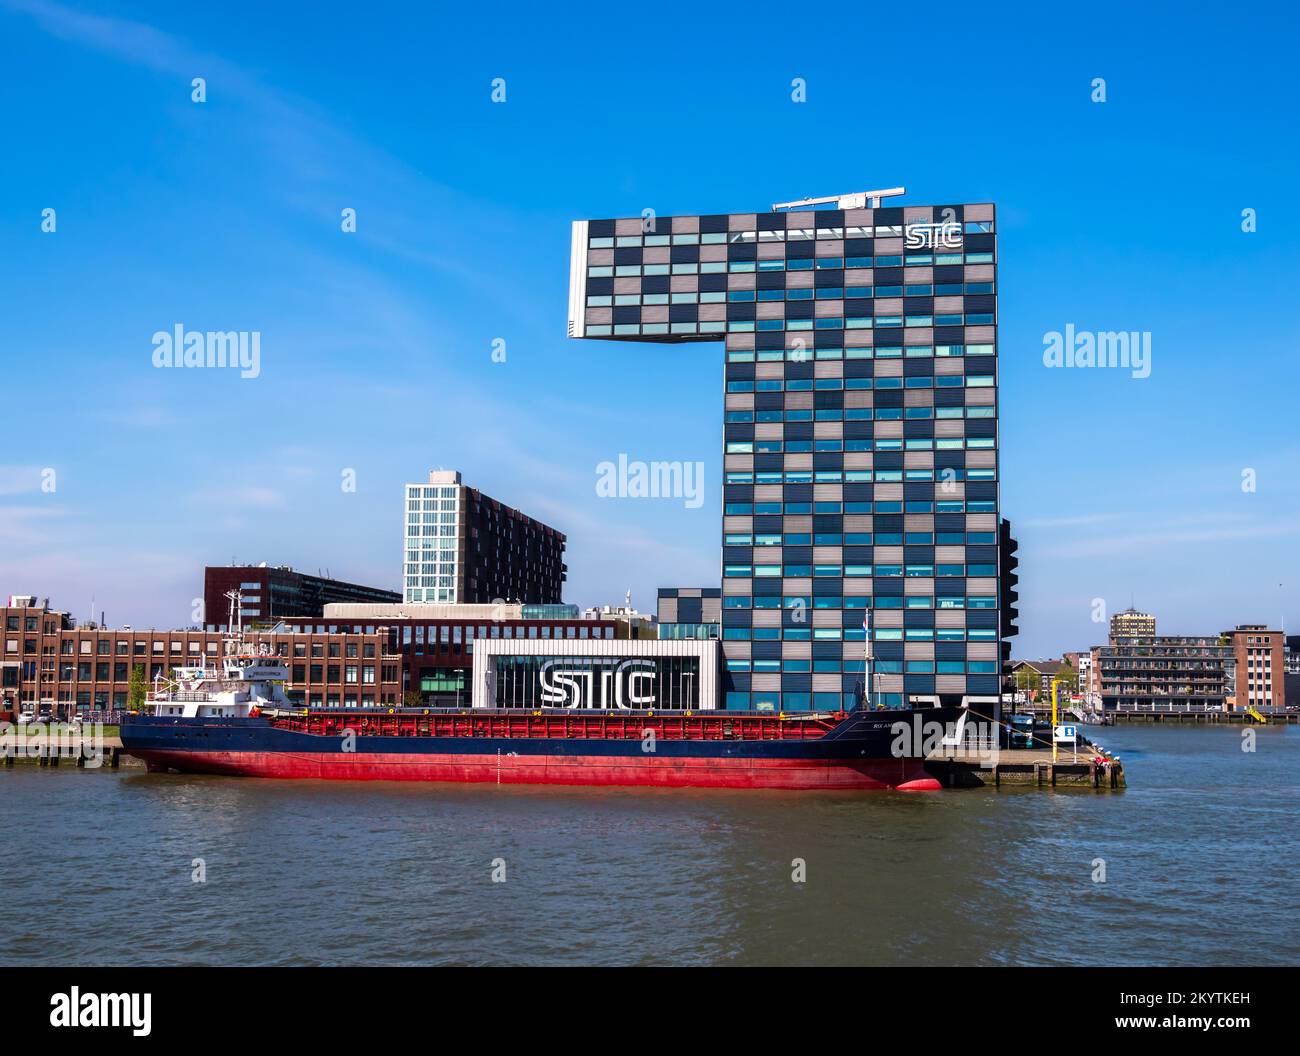 Rotterdam, Netherlands - April 28, 2022: The Shipping and Transport College Group (STC Group) is an international maritime transport and logistics edu Stock Photo